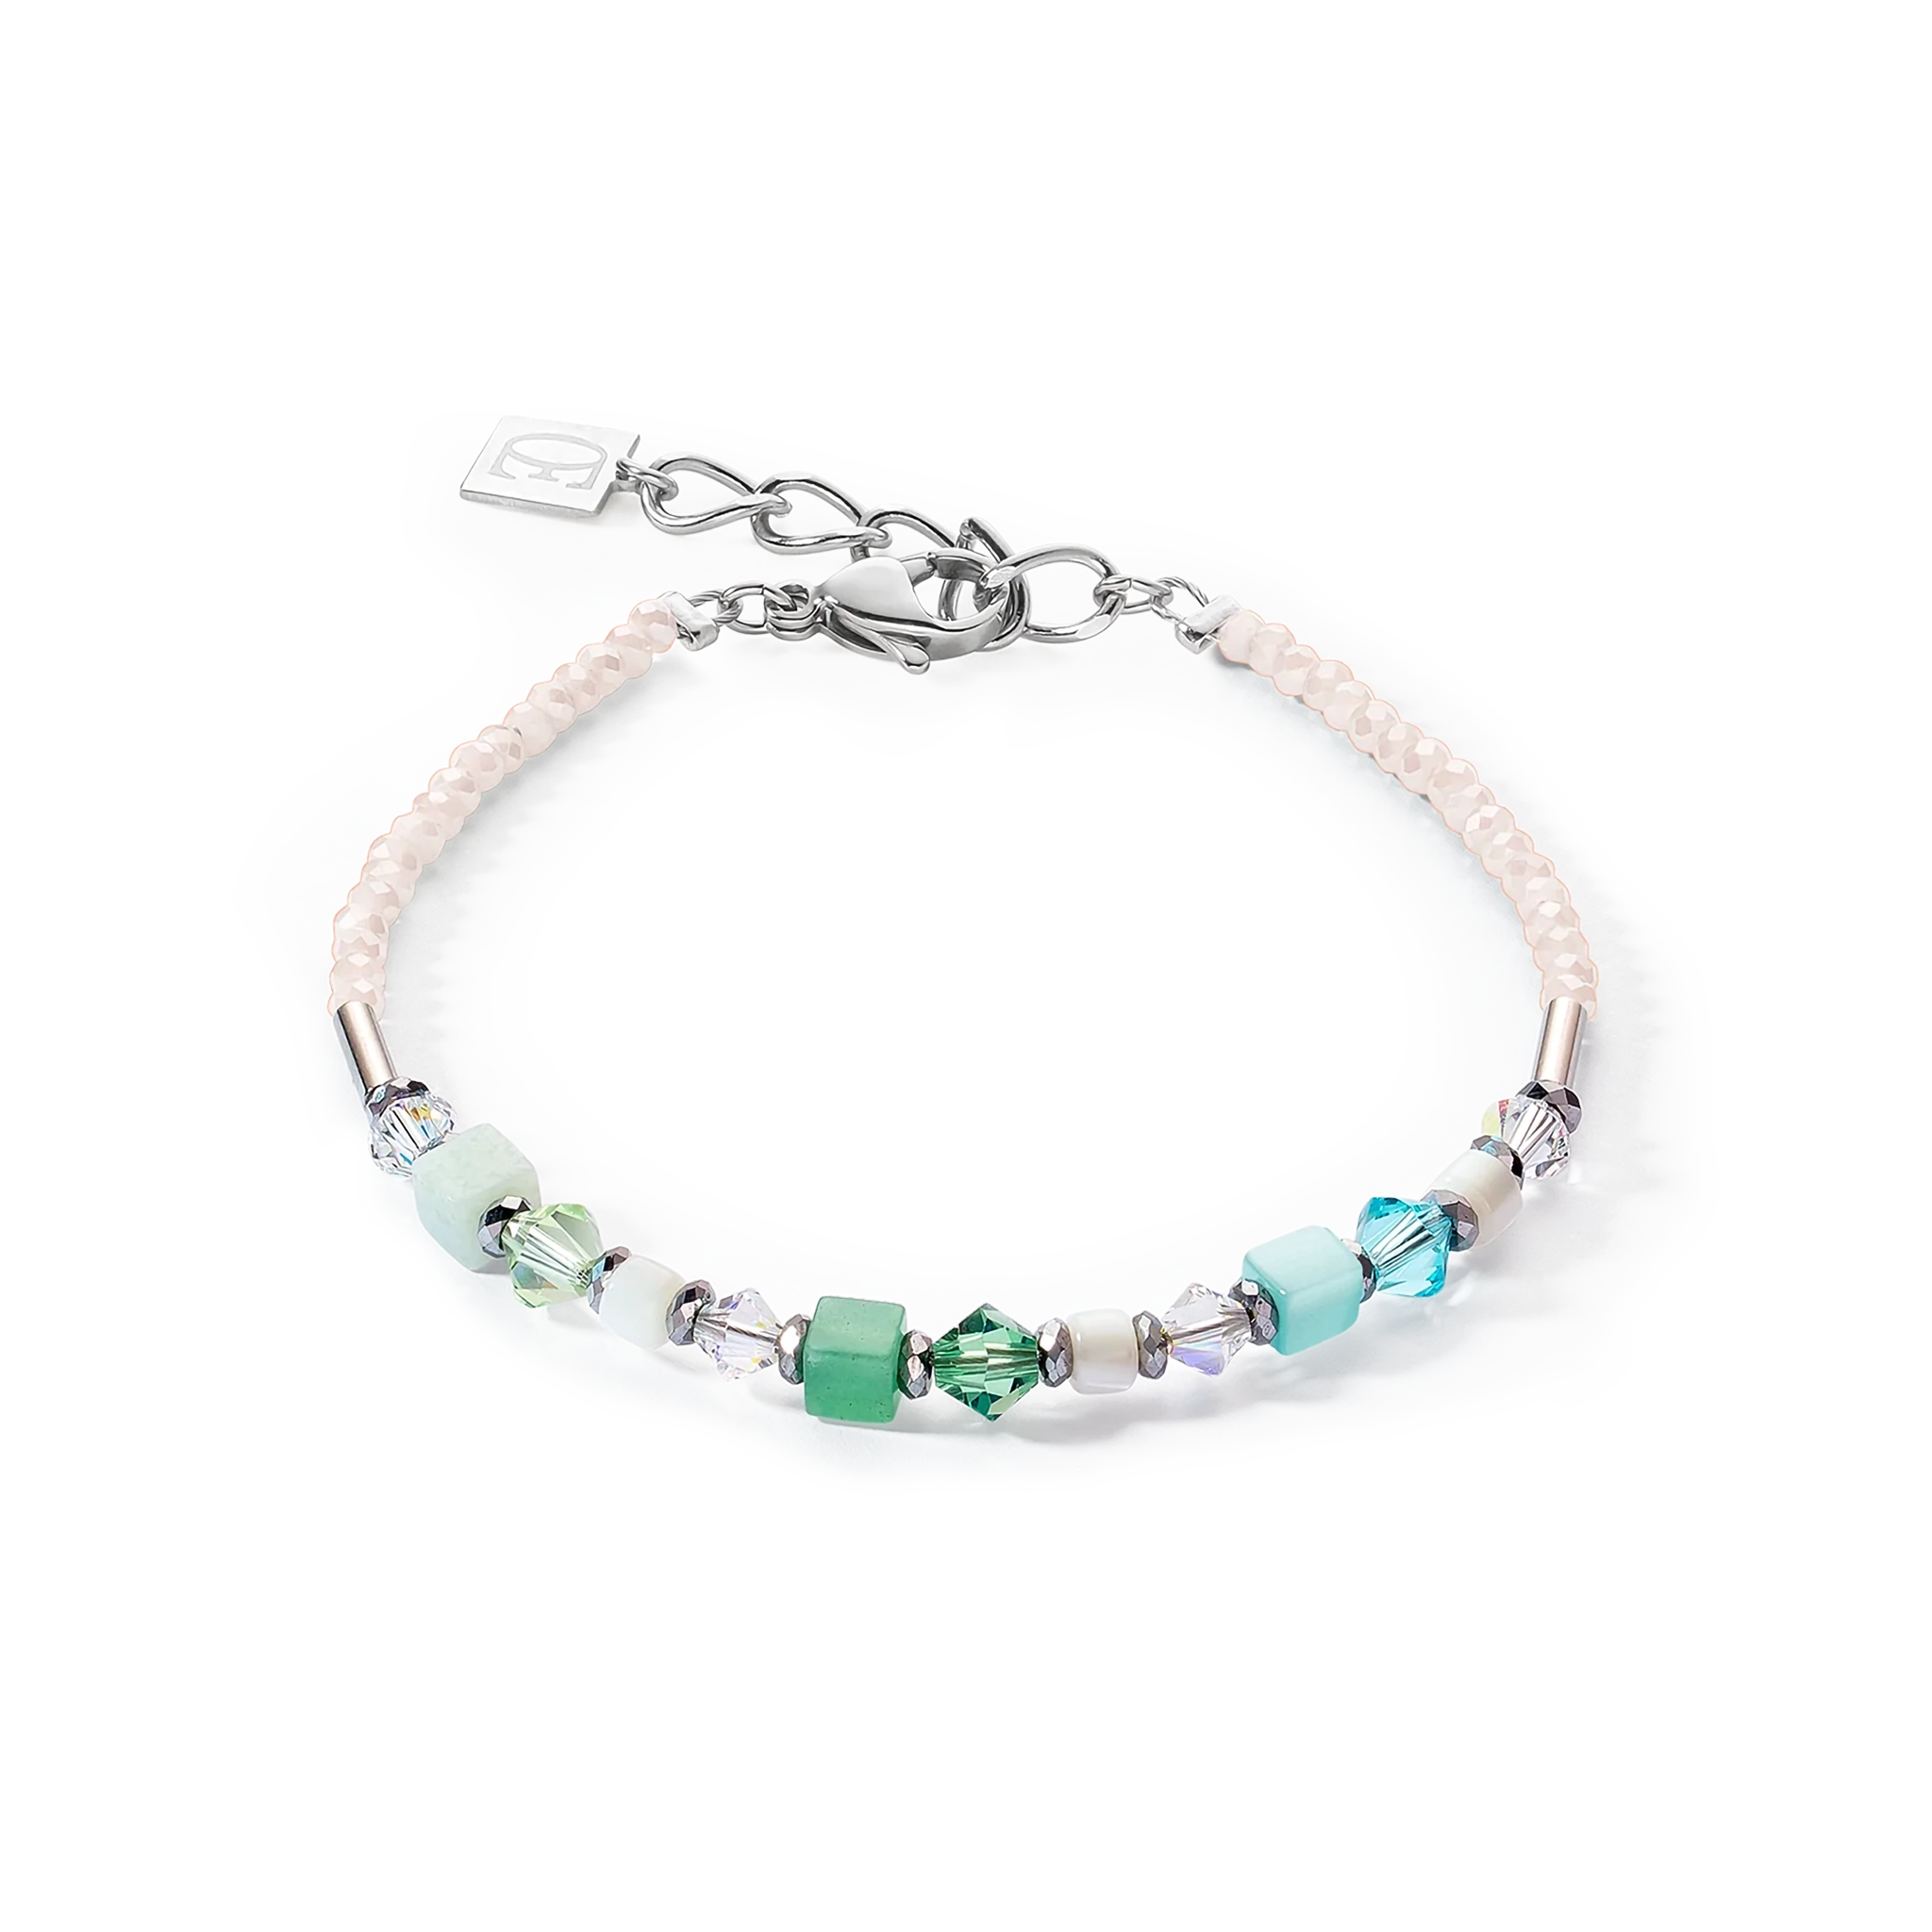 A bracelet featuring white, green and blue cut glass beads and tiny cube stones